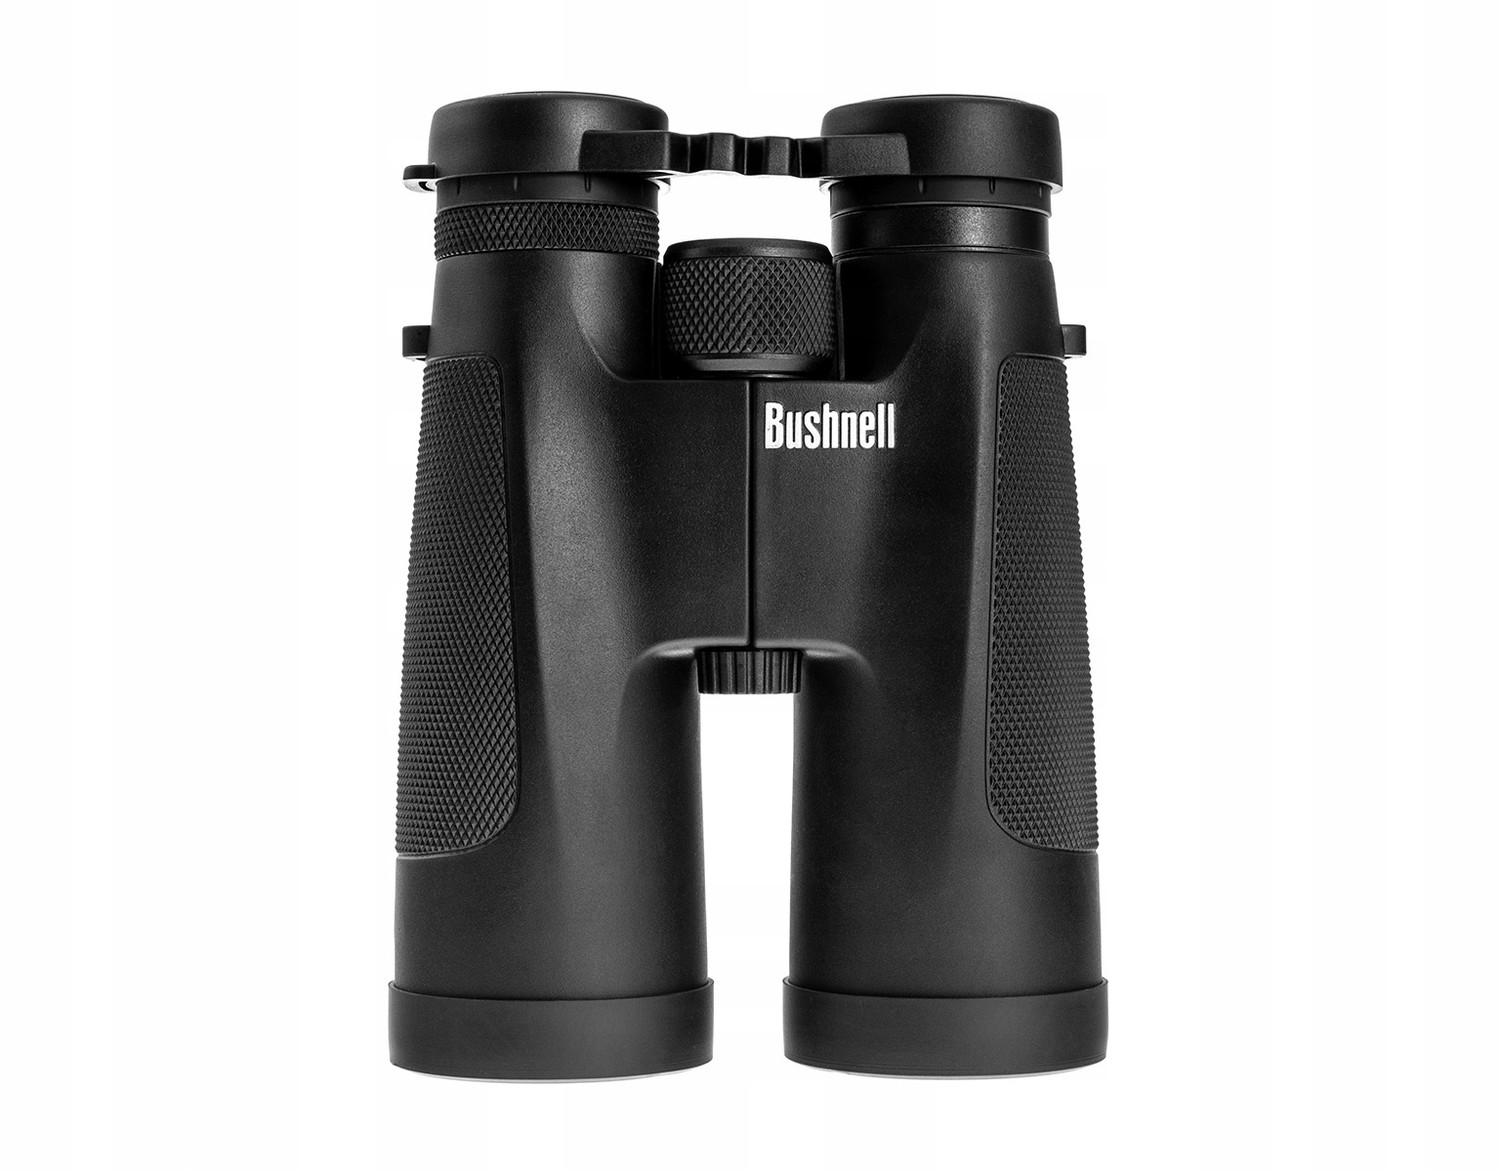 Dalekohled Bushnell Pacifica 12x50